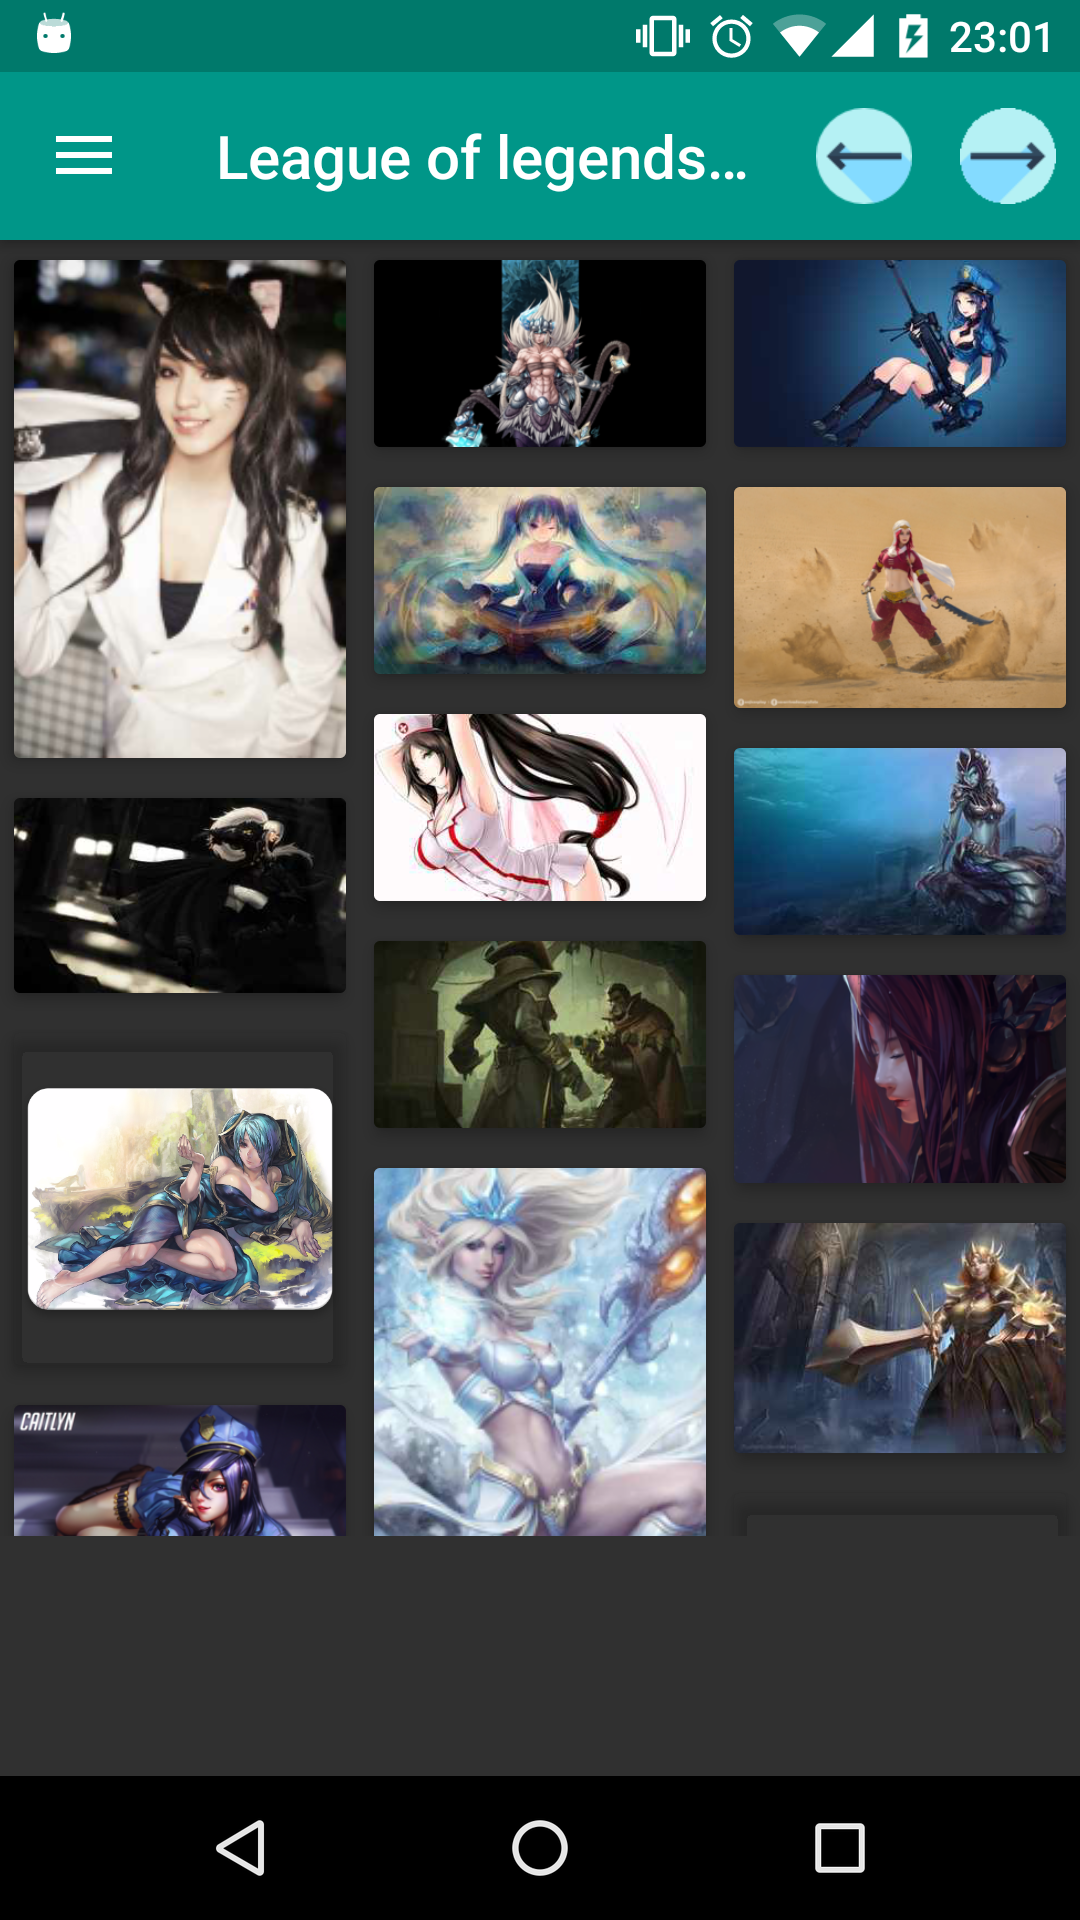 League of Legends wallpapers image,pics,app,pictures,sexy,erotica,femboy,apk,backgrounds,porn,android,futanari,henati,league,for,download,hentai,manga,galleries,wallpapers,mature,hentia,search,legends